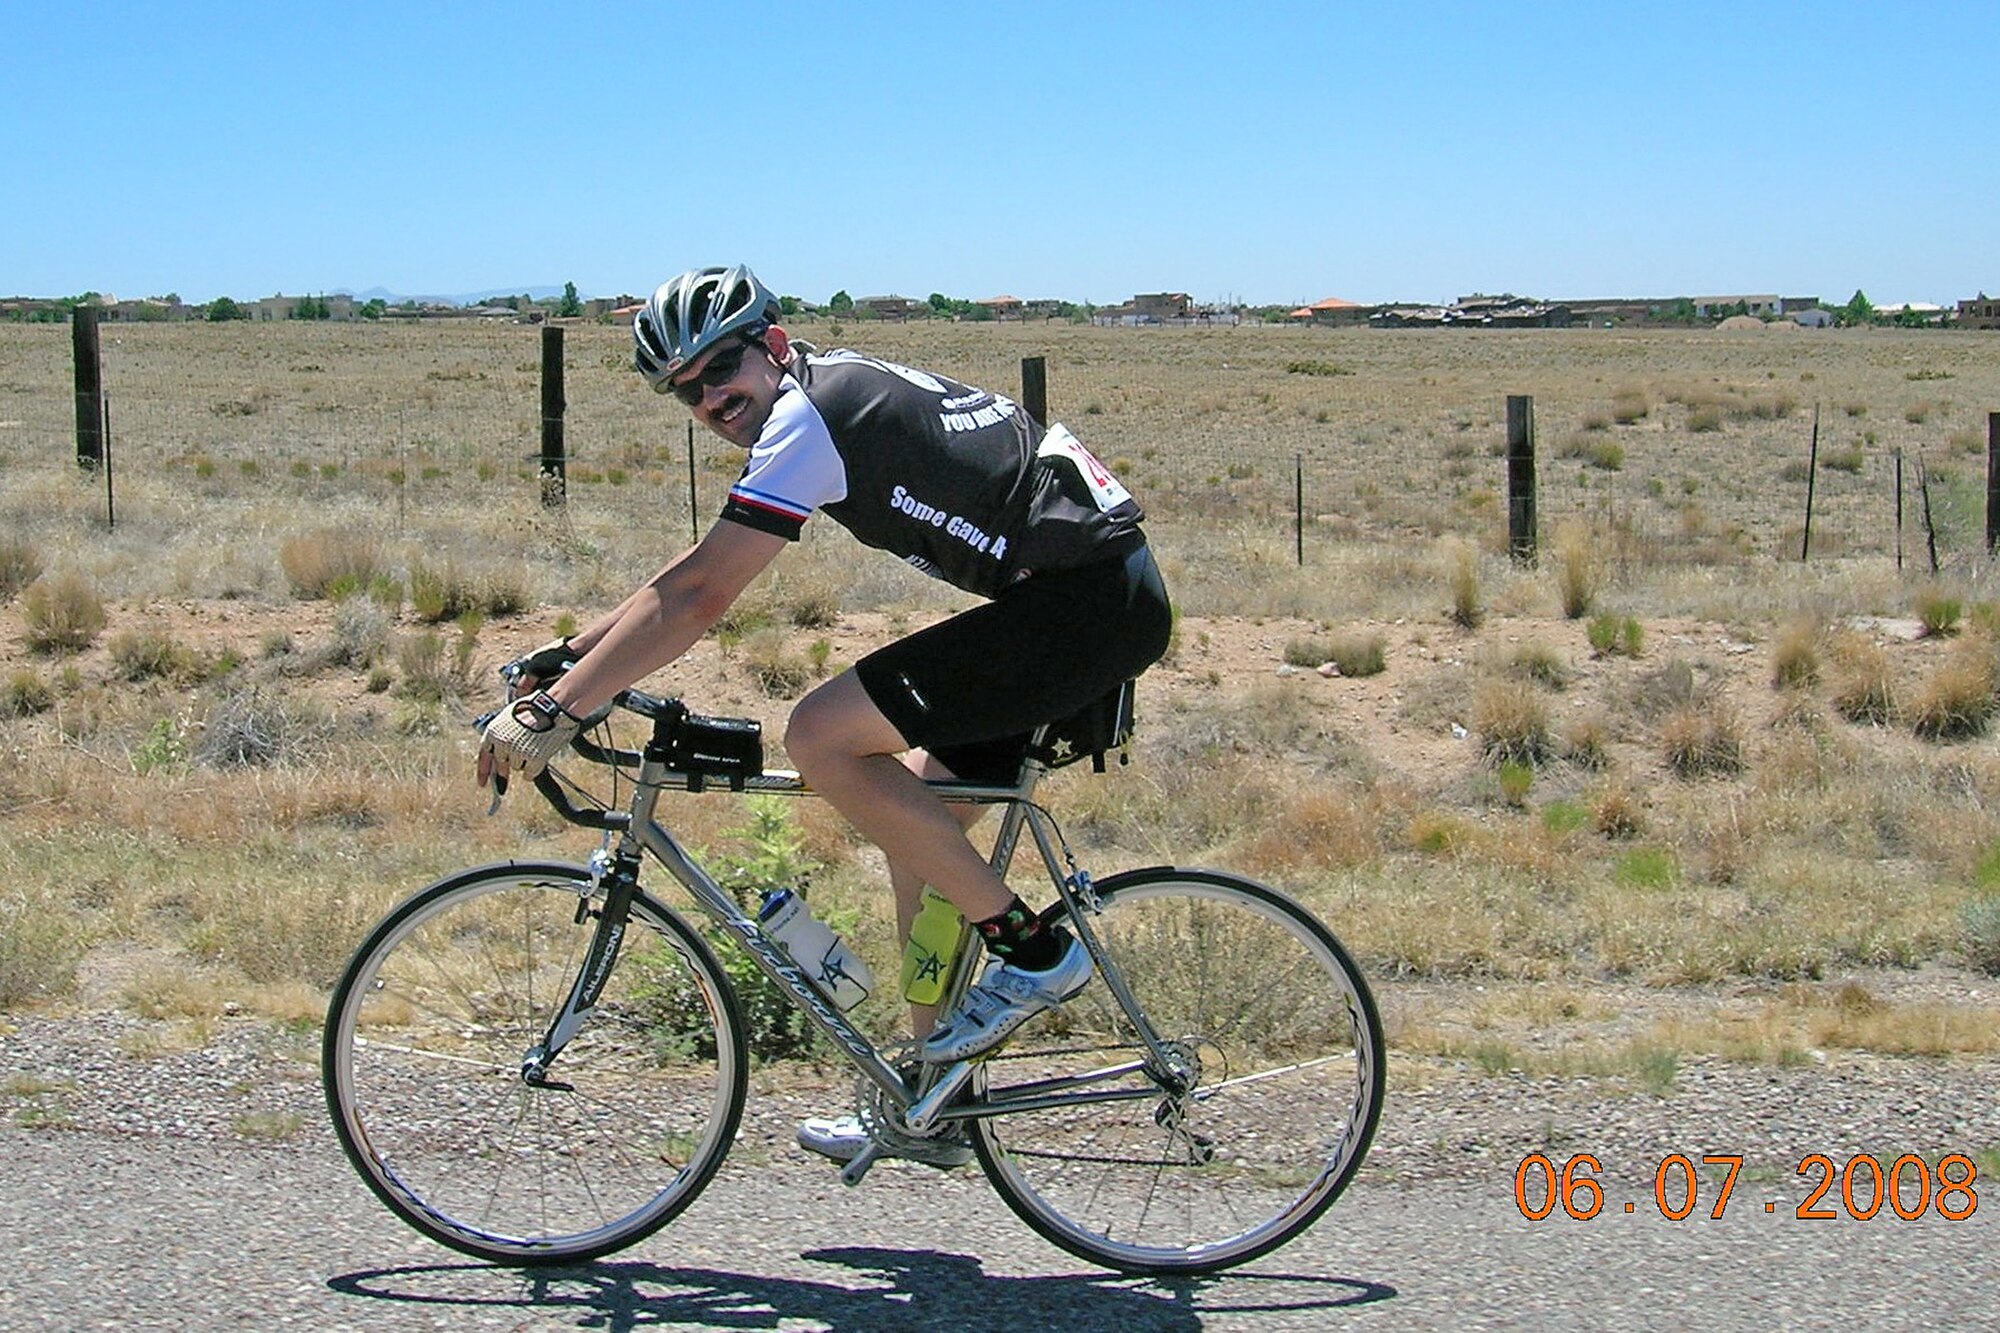 Then Maj. Craig Forcum, now 341st Medical Group commander, rides his bicycle during a 100-mile ride June 2008, in Albuquerque, New Mexico. Forcum is an avid bicyclist and likes to ride his bike to work as much as possible. (Courtesy photo)